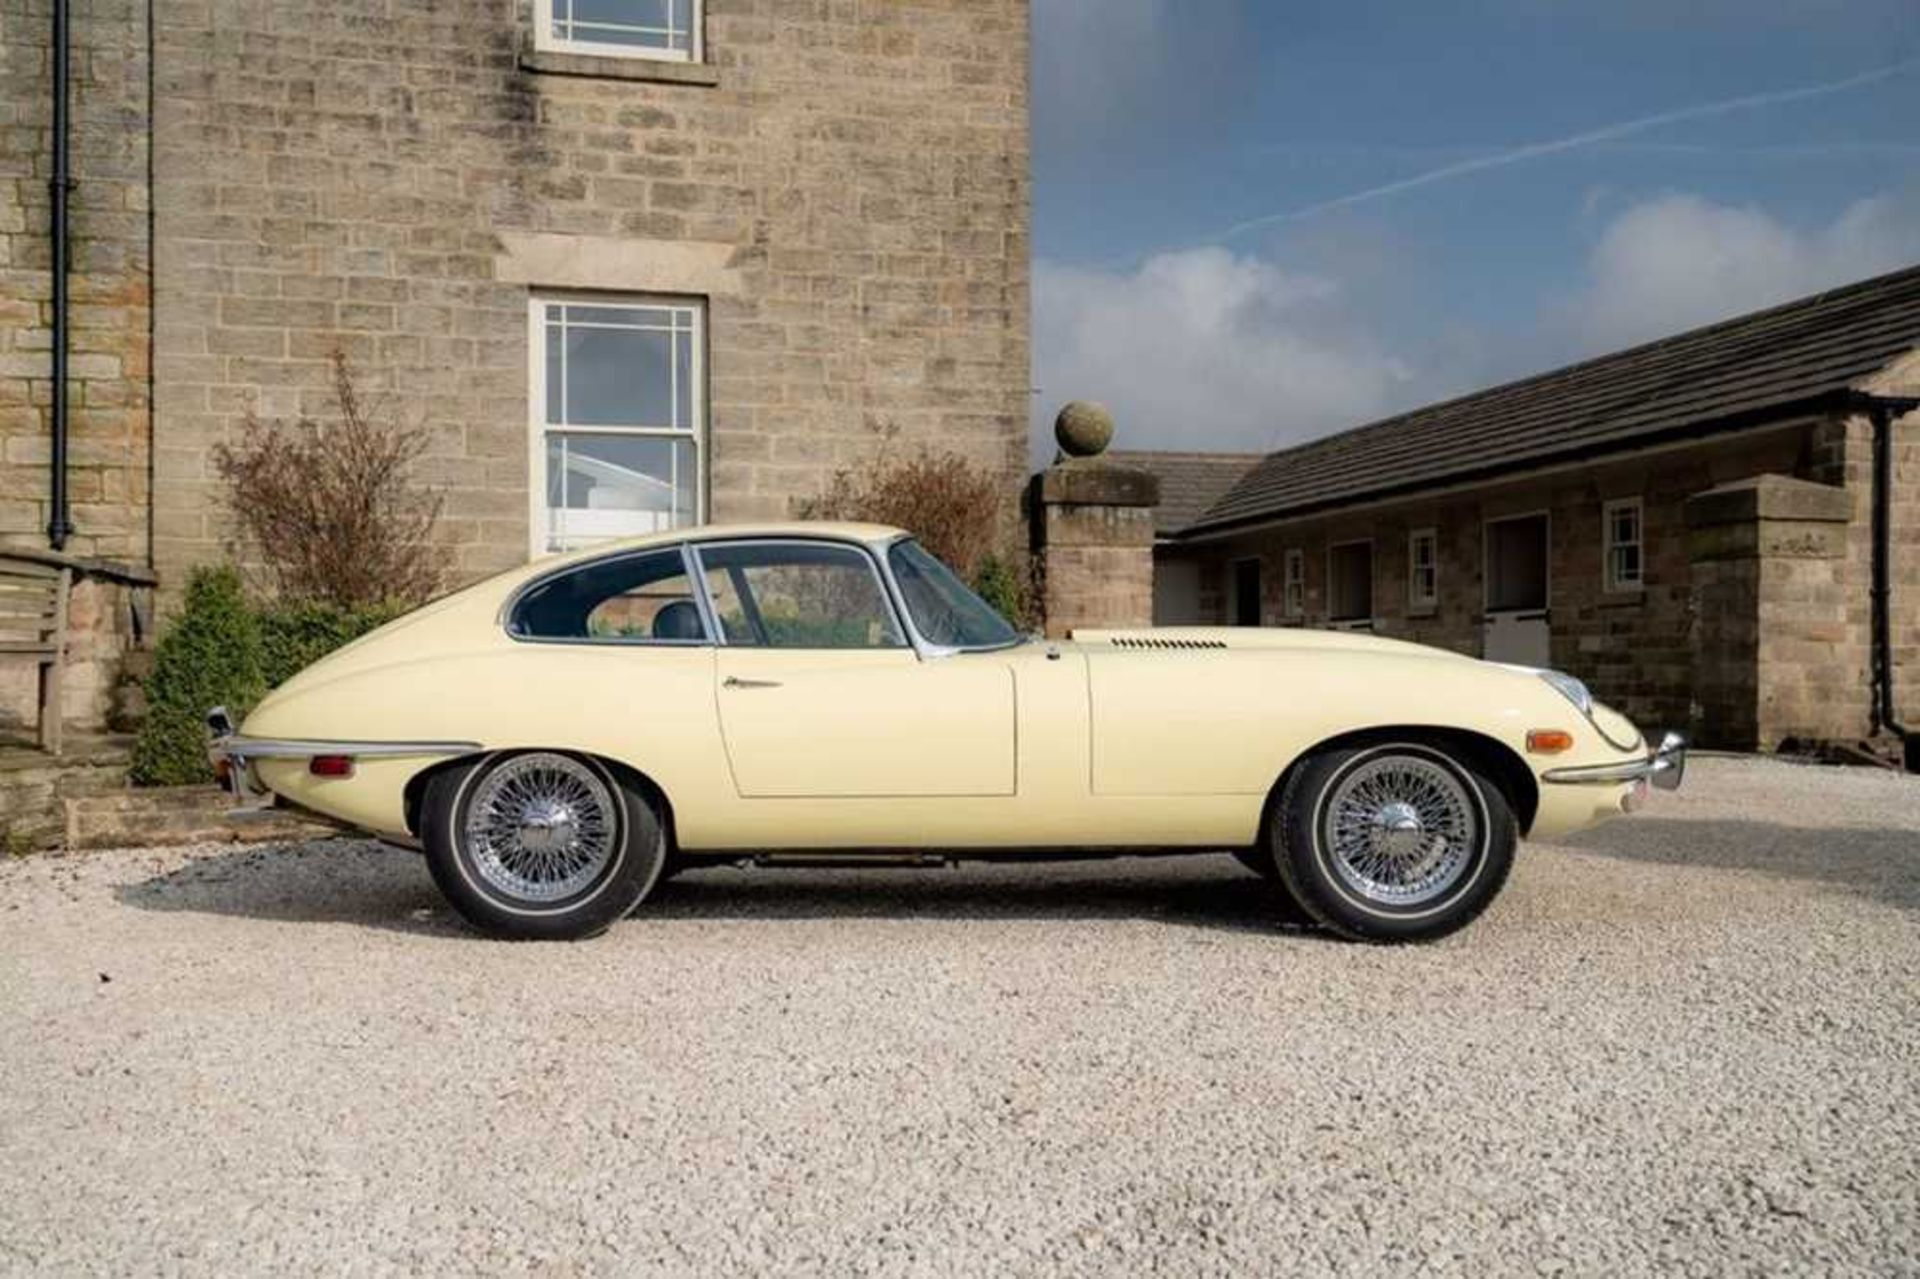 1968 Jaguar E-Type 4.2 Litre Coupe Genuine 44,000 miles from new - Image 10 of 68